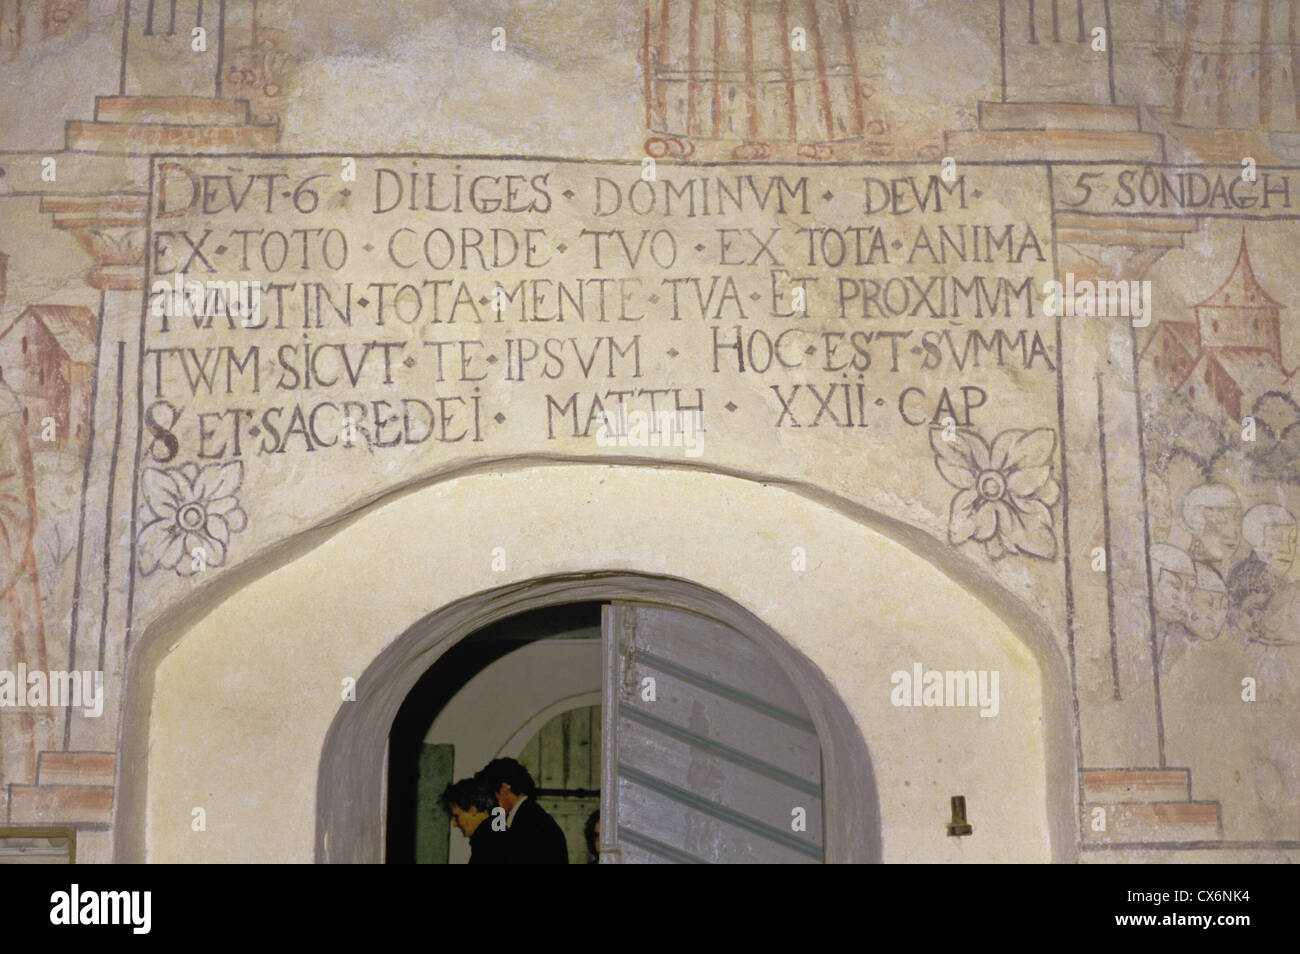 Latin text and wall murals in the medieval St. Lawrence Church of Isokyro, Finland Stock Photo